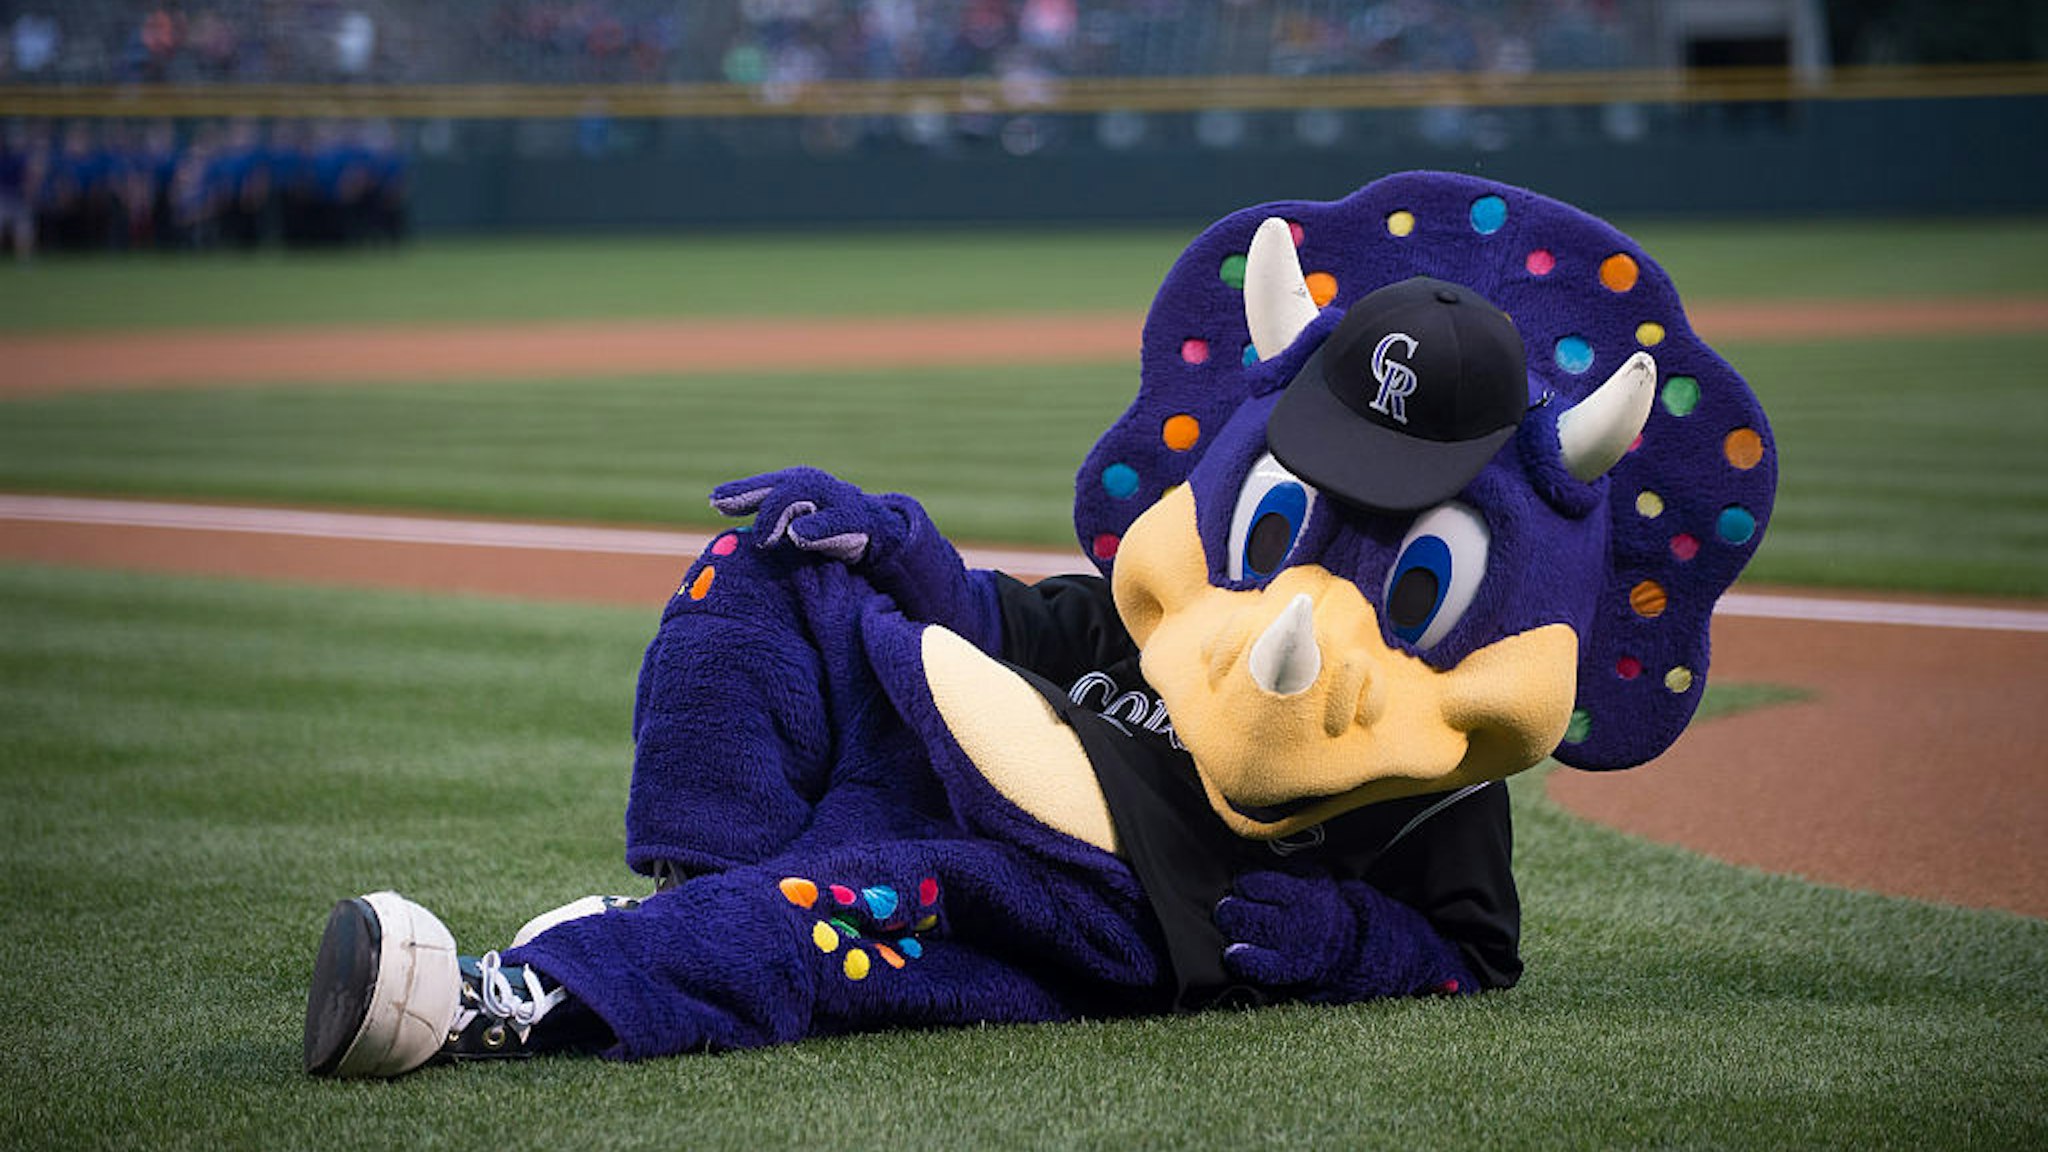 DENVER, CO - AUGUST 4: Colorado Rockies mascot Dinger performs before a game between the Colorado Rockies and the Los Angeles Dodgers at Coors Field on August 4, 2016 in Denver, Colorado. (Photo by Dustin Bradford/Getty Images)